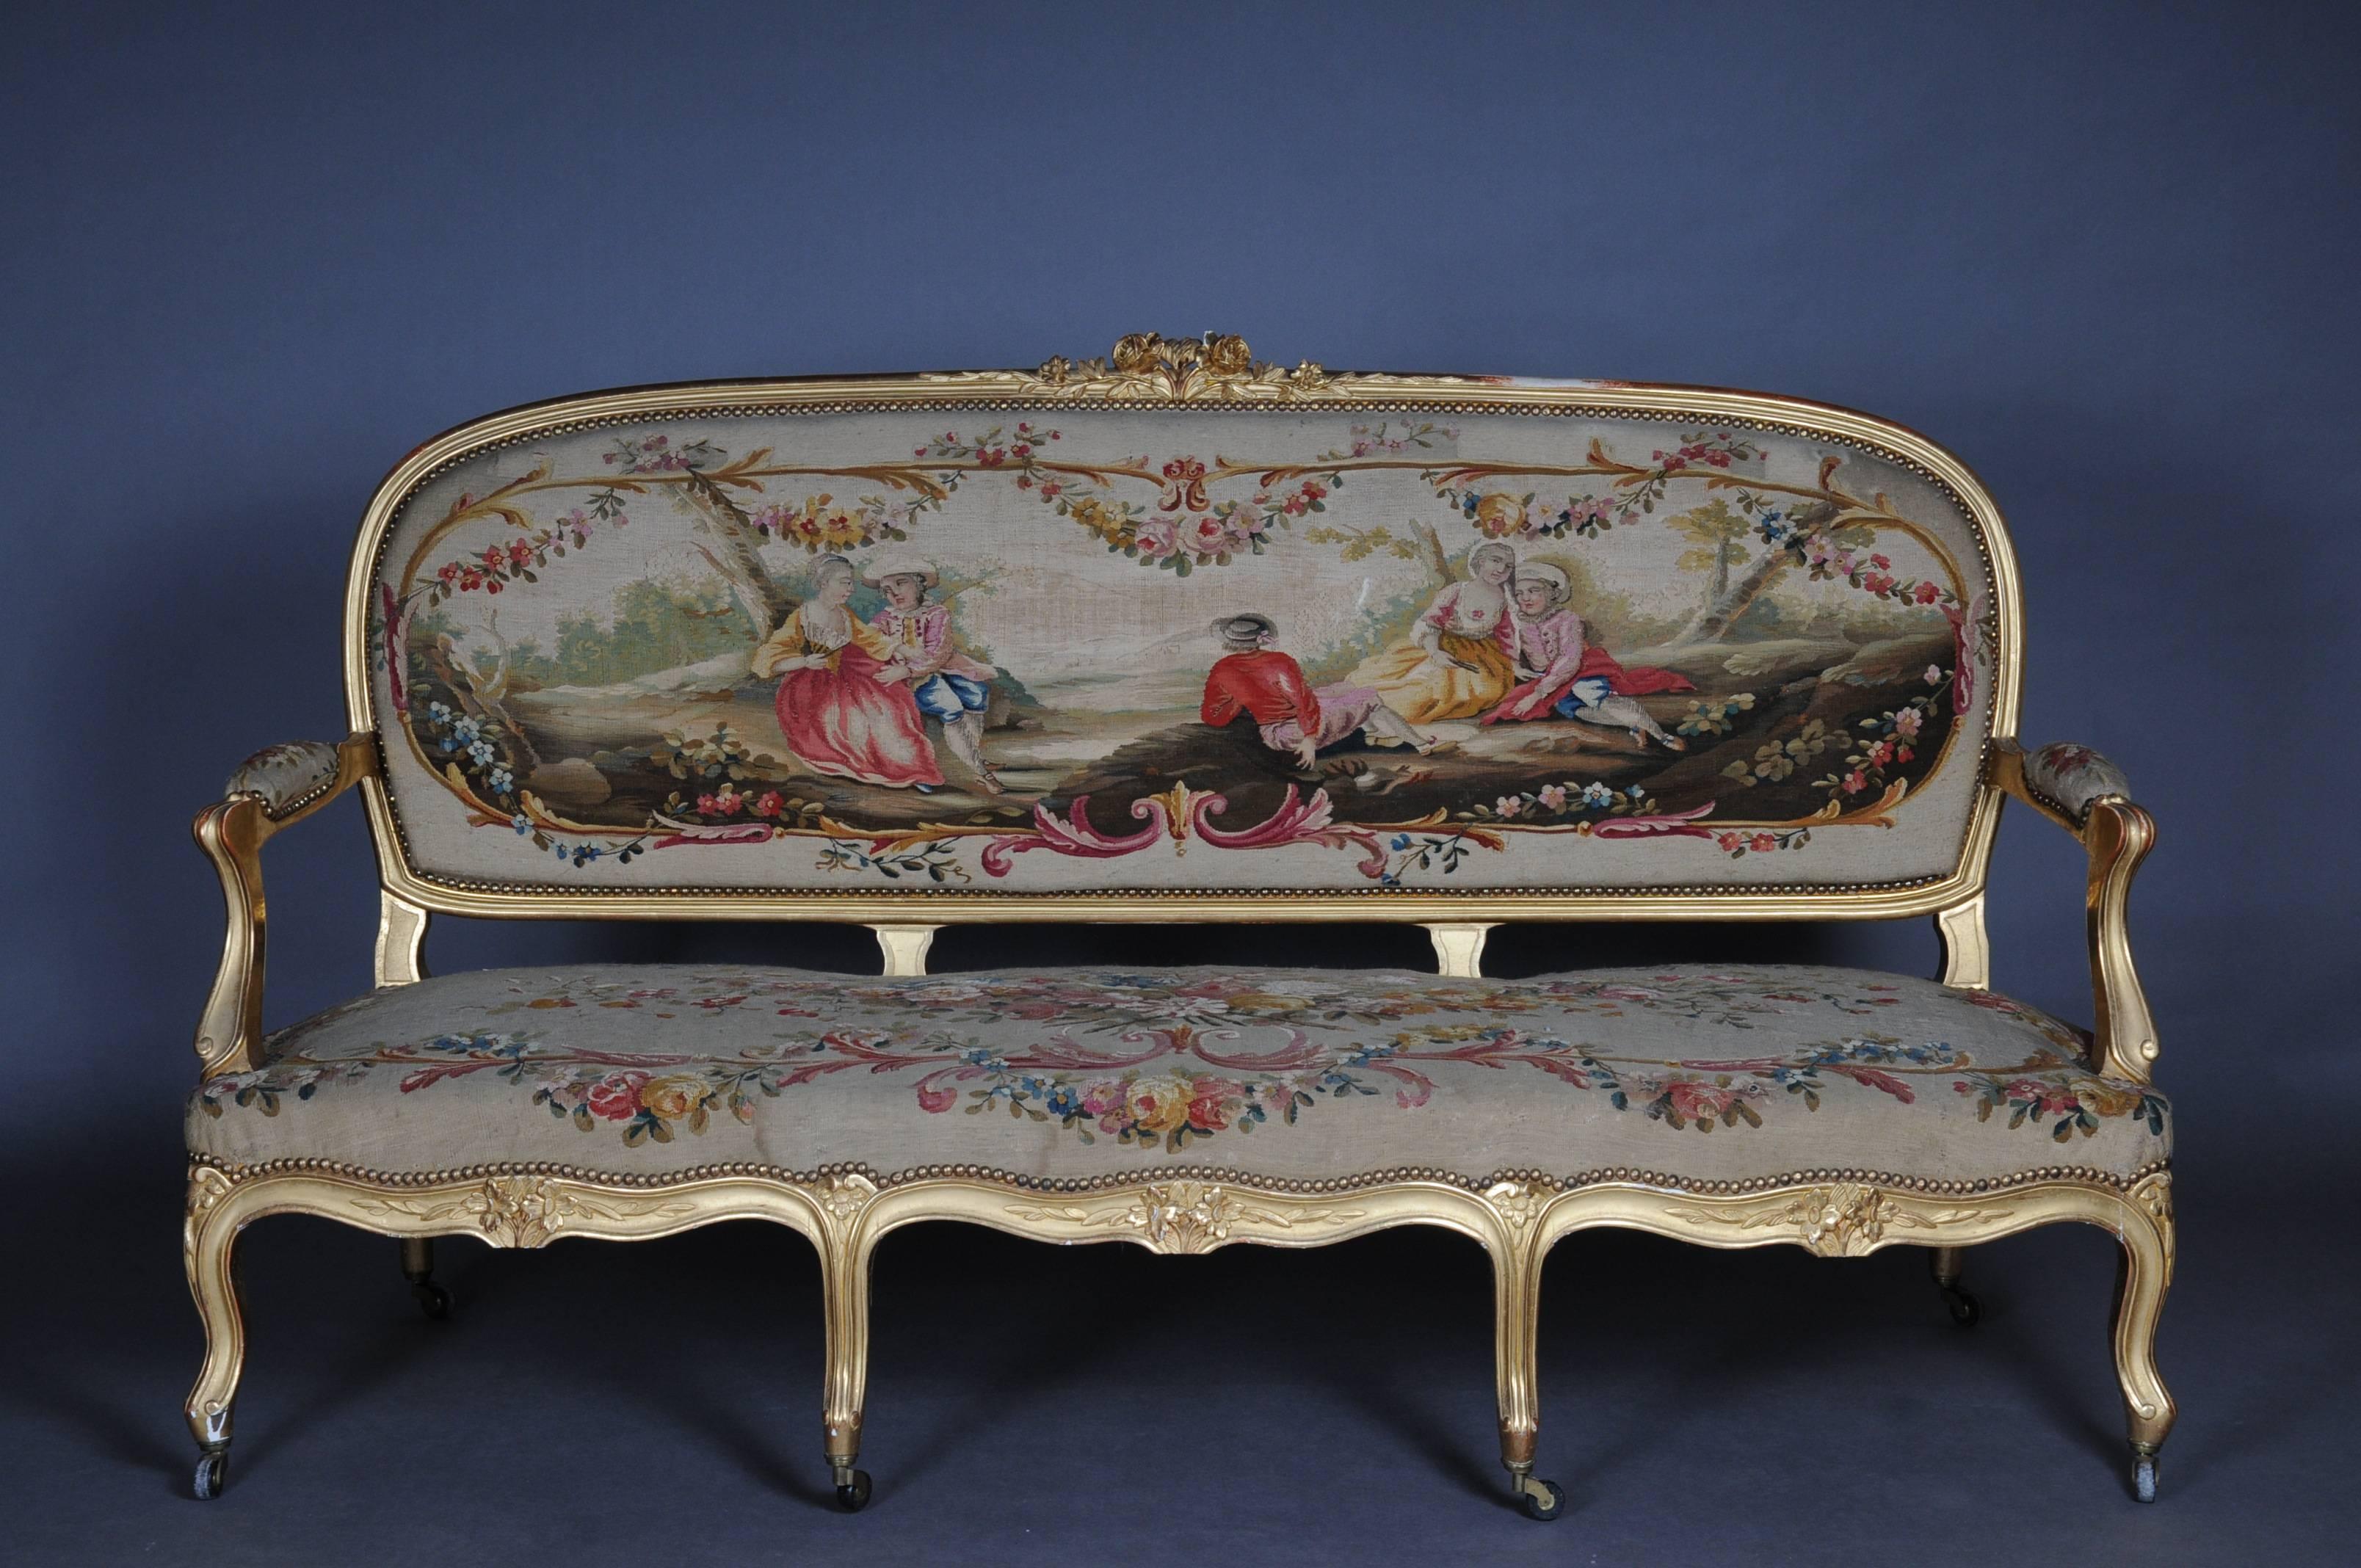 Genuine gold leaf on solid wood. Hand-carved wooden body with curved legs. Very old and decorative French sofa set

Gobelin fabric cover: Decorative floral bouquet with rococo figures. Aubusson Tapestry In the form of rococo figures and richly